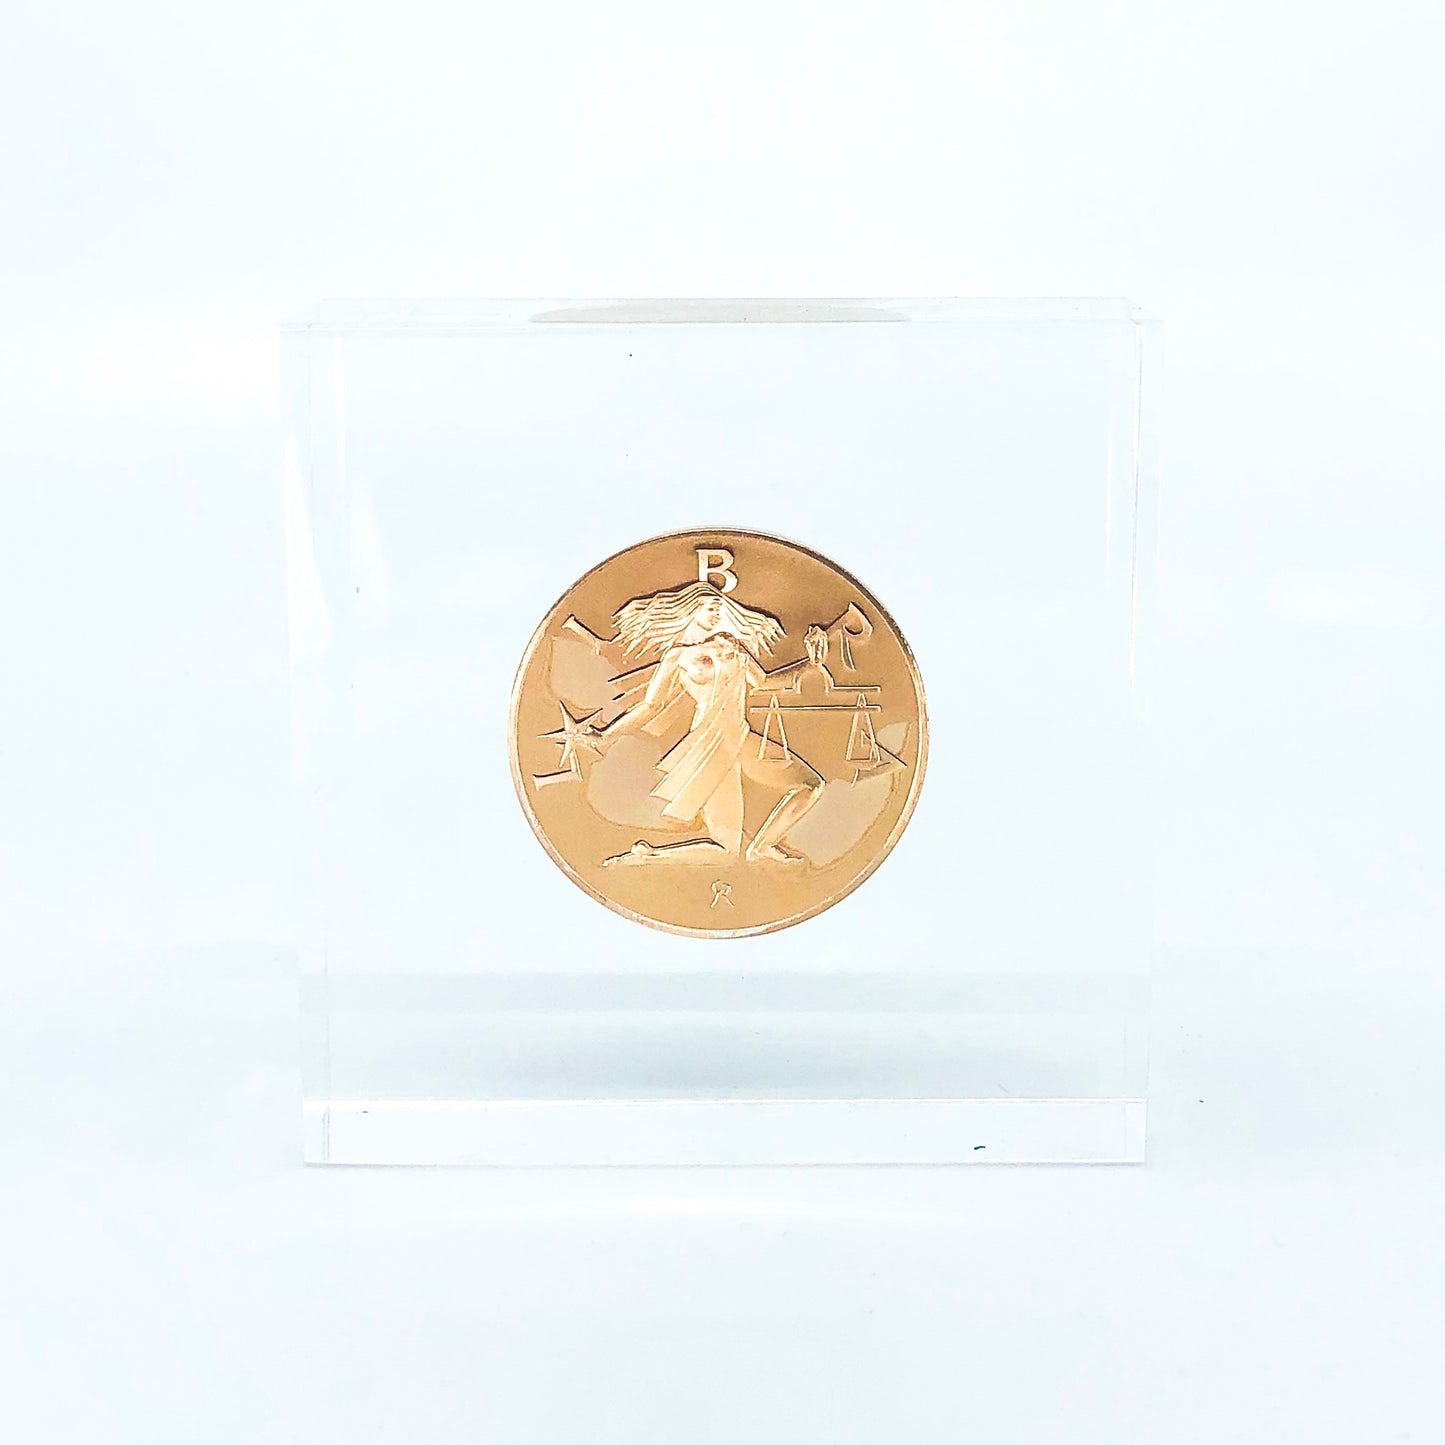 Lucite Paperweight with Gold Libra Astrology Coin